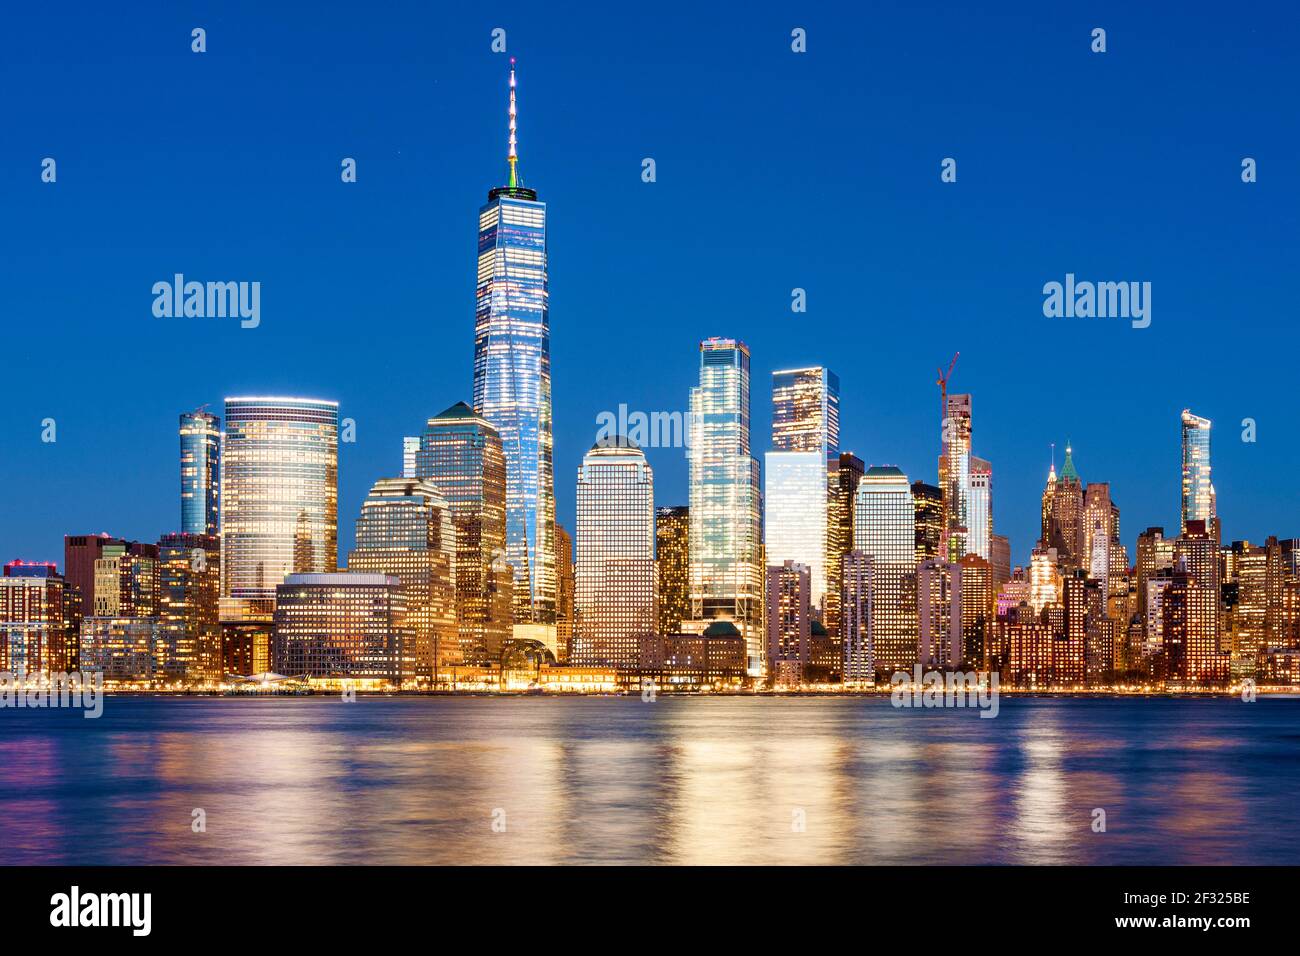 New York Skyline Lights at Night, Lower Manhattan with Freedom Tower and World Financial Center, Hudson River, New York City. Stock Photo